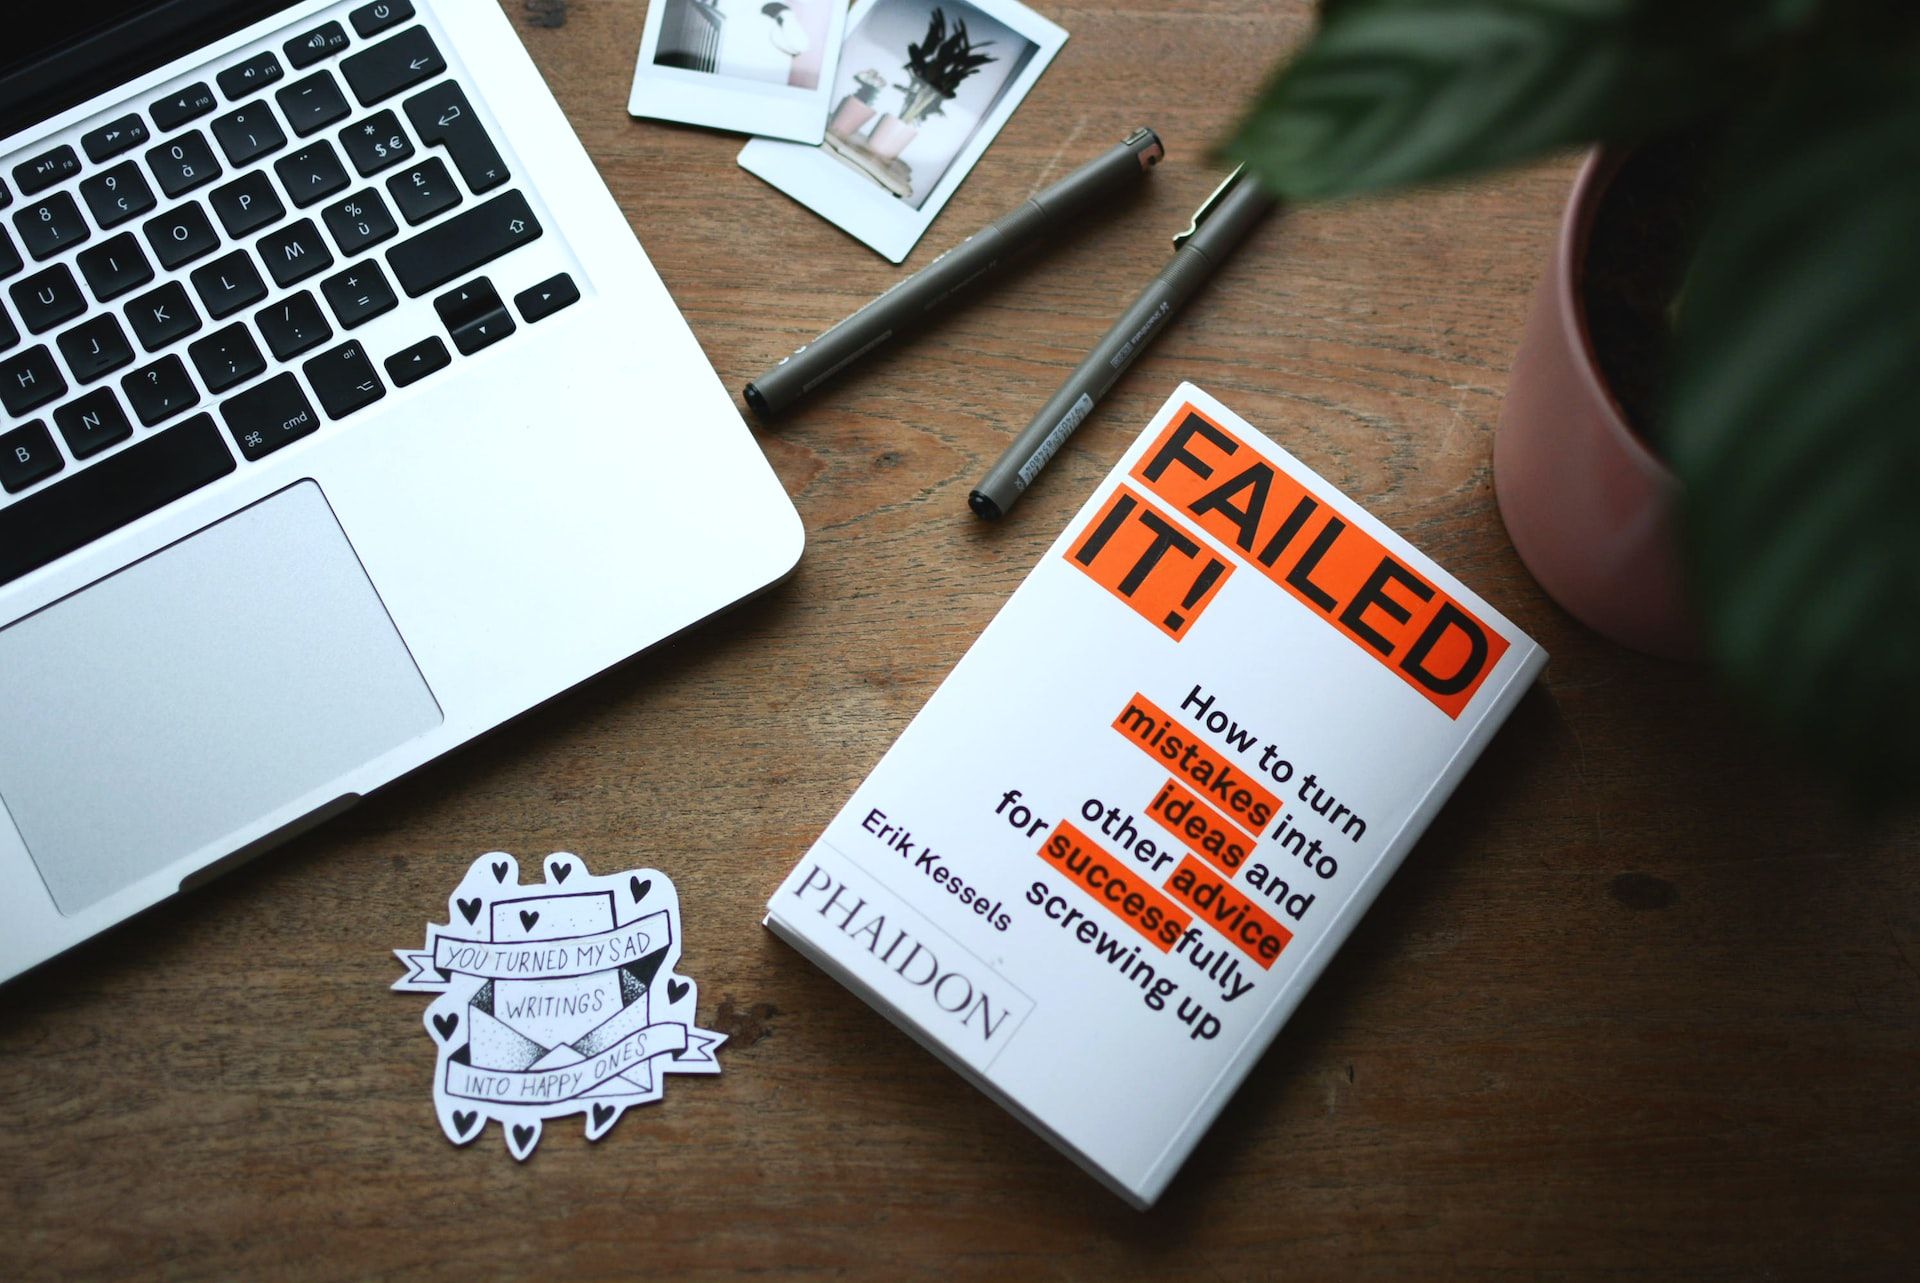 paperback copy of 'Failed It!' by Erik Kessels places beside a MacBook laptop on a writing table